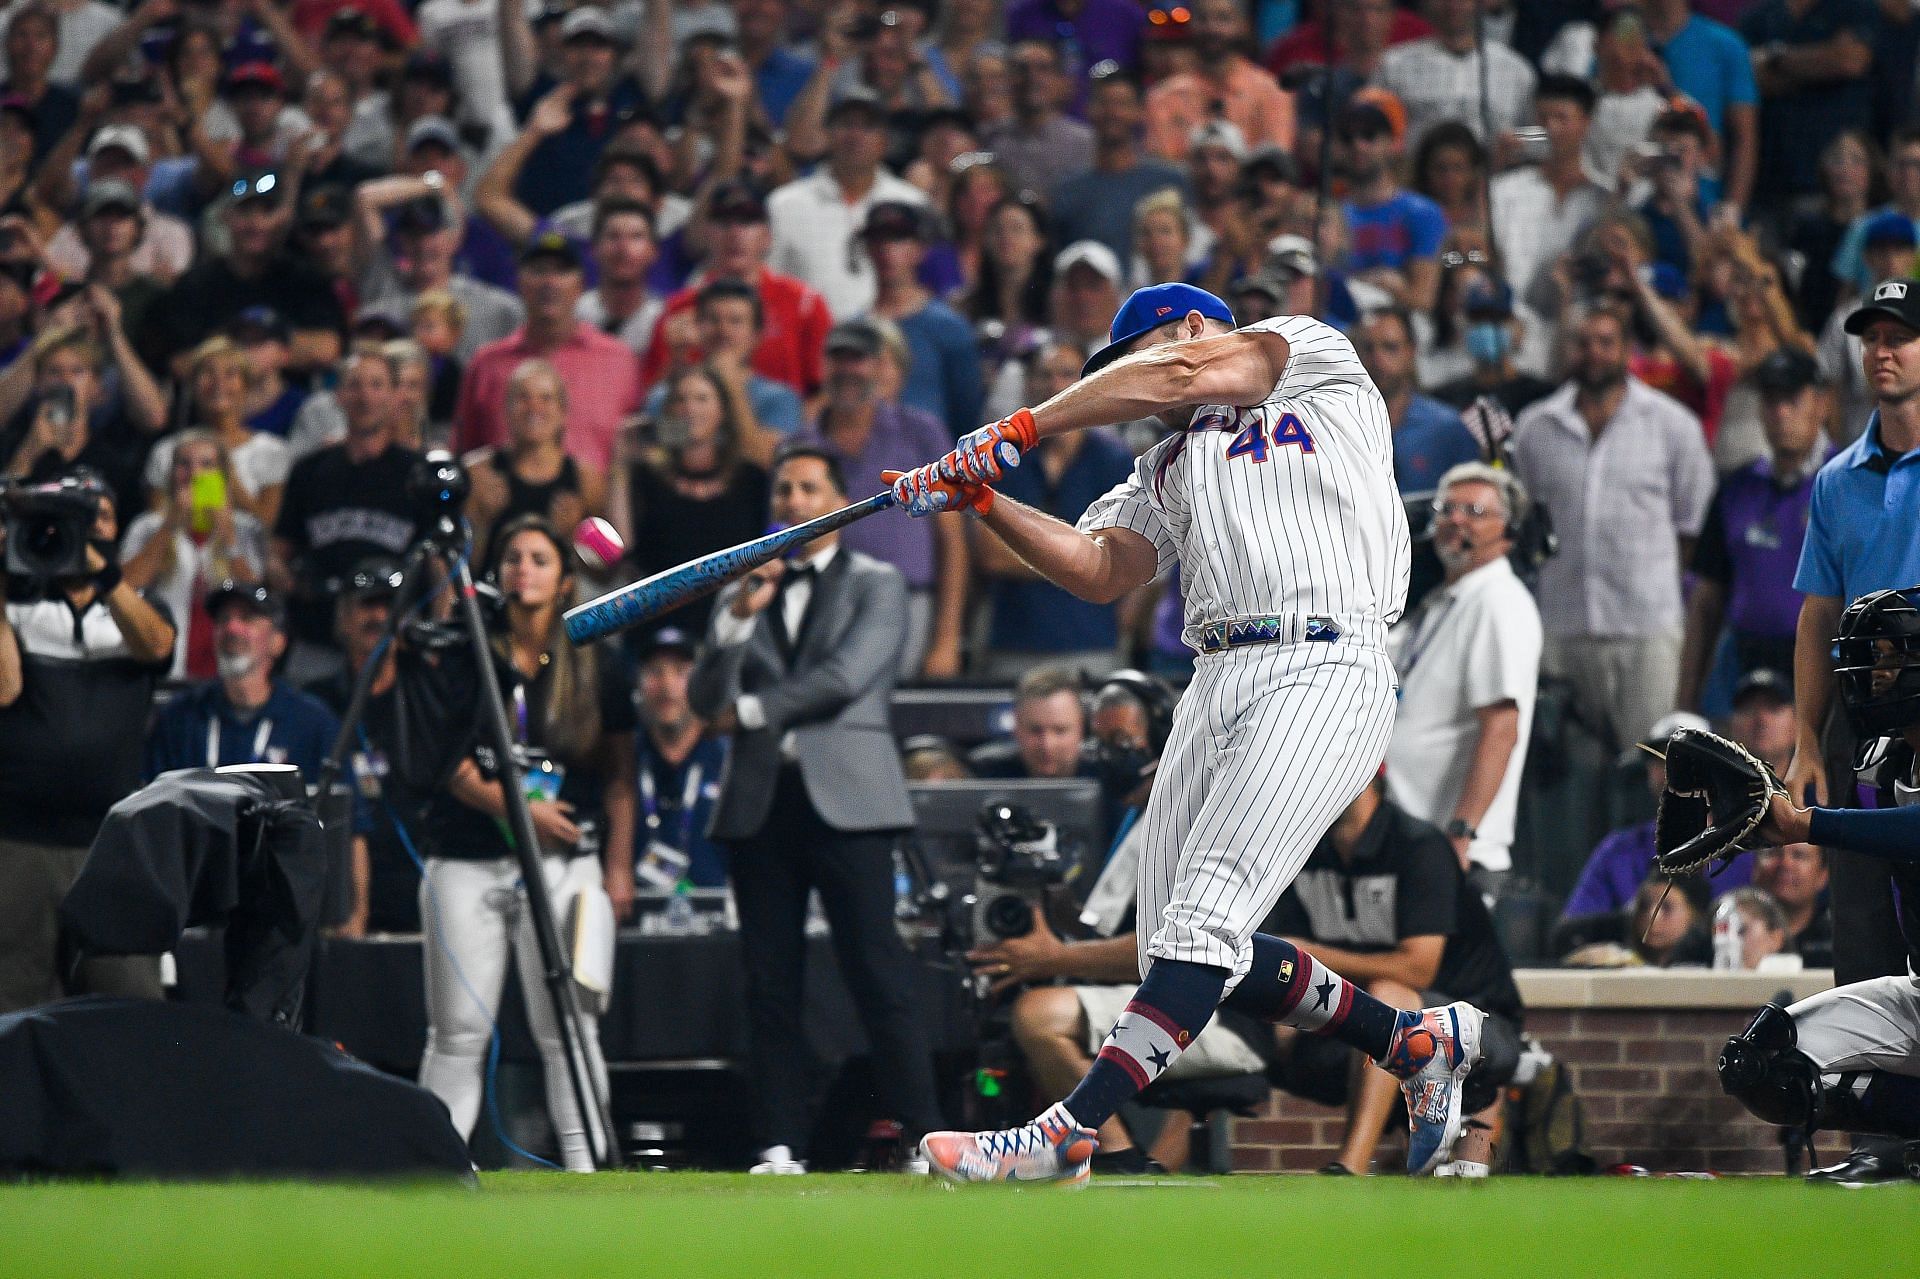 Pete Alonso, the two-time defending Home Run Derby champion, will be looking to make it three in a row.